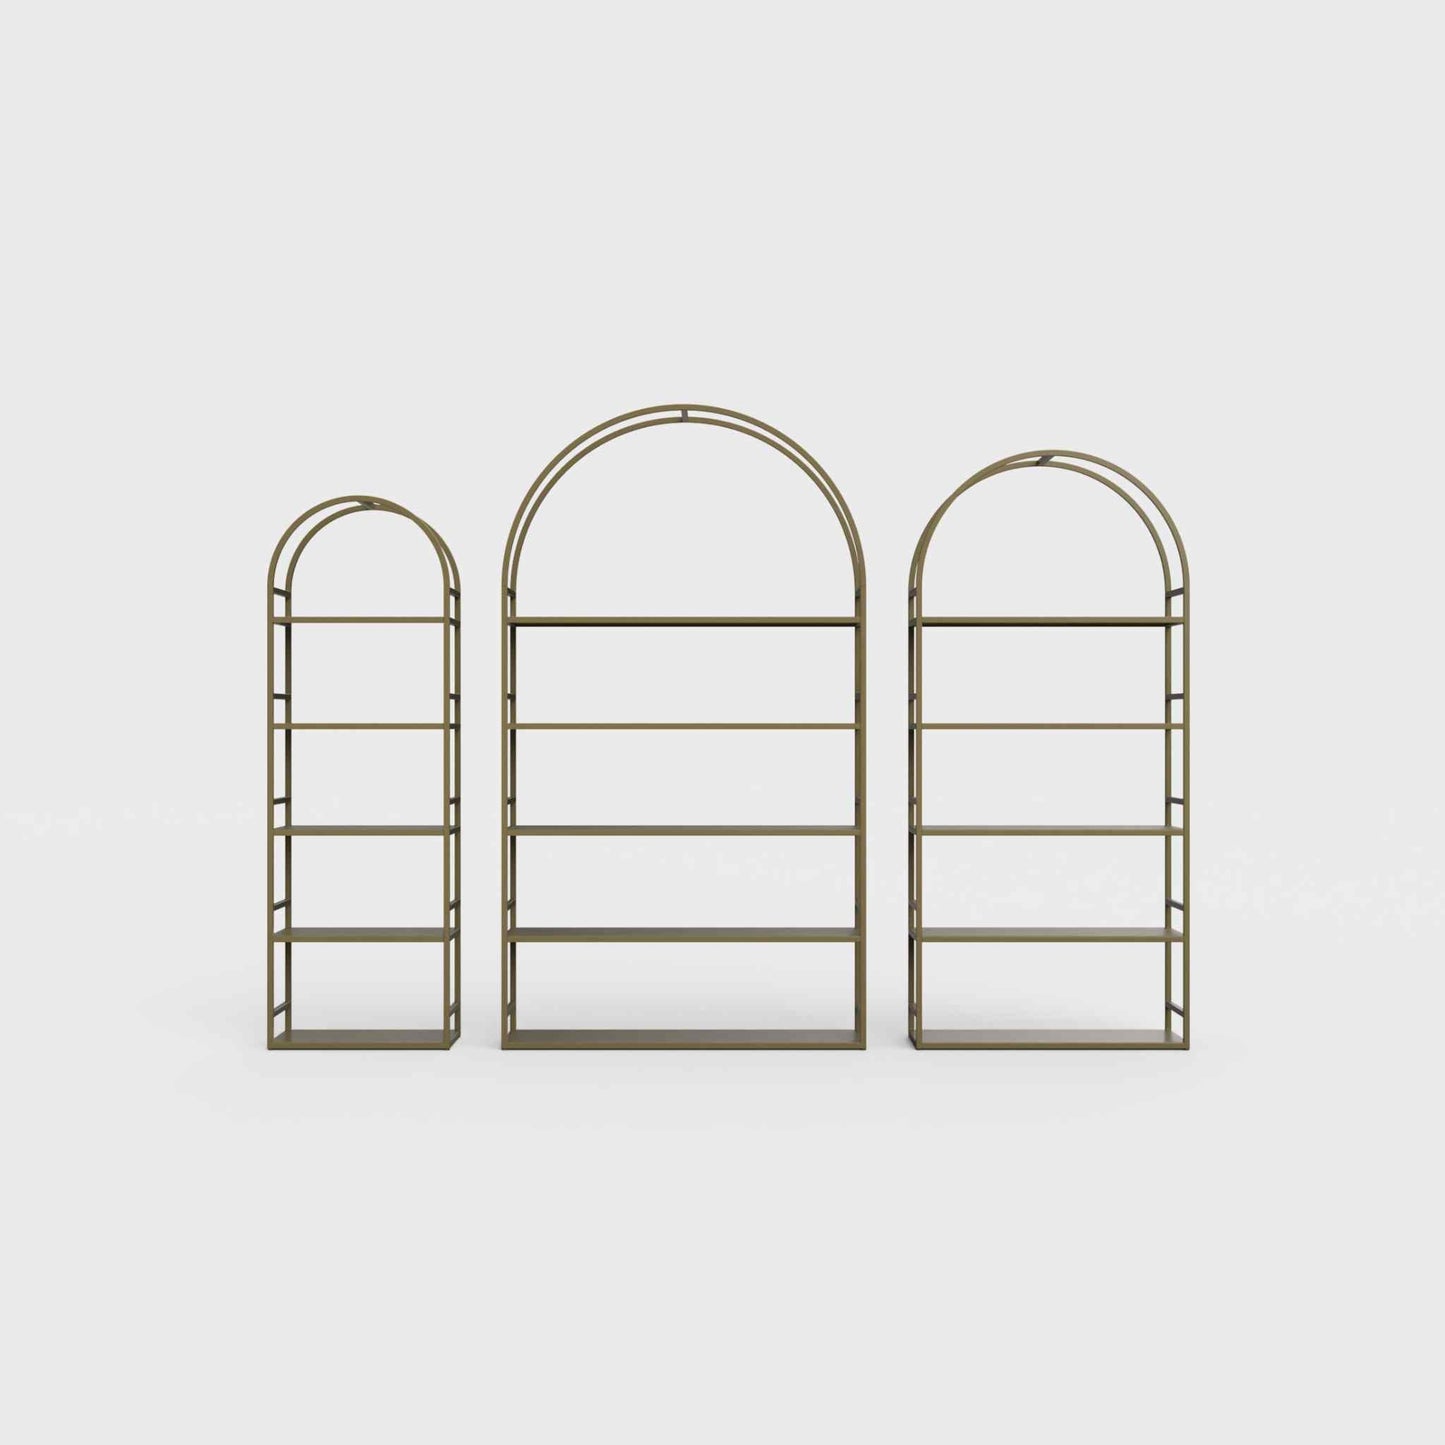 Arched bookcase Arkada, available in Switzerland through ÉTAUDORÉ, made from highest quality powdered coated steel in brown olive color